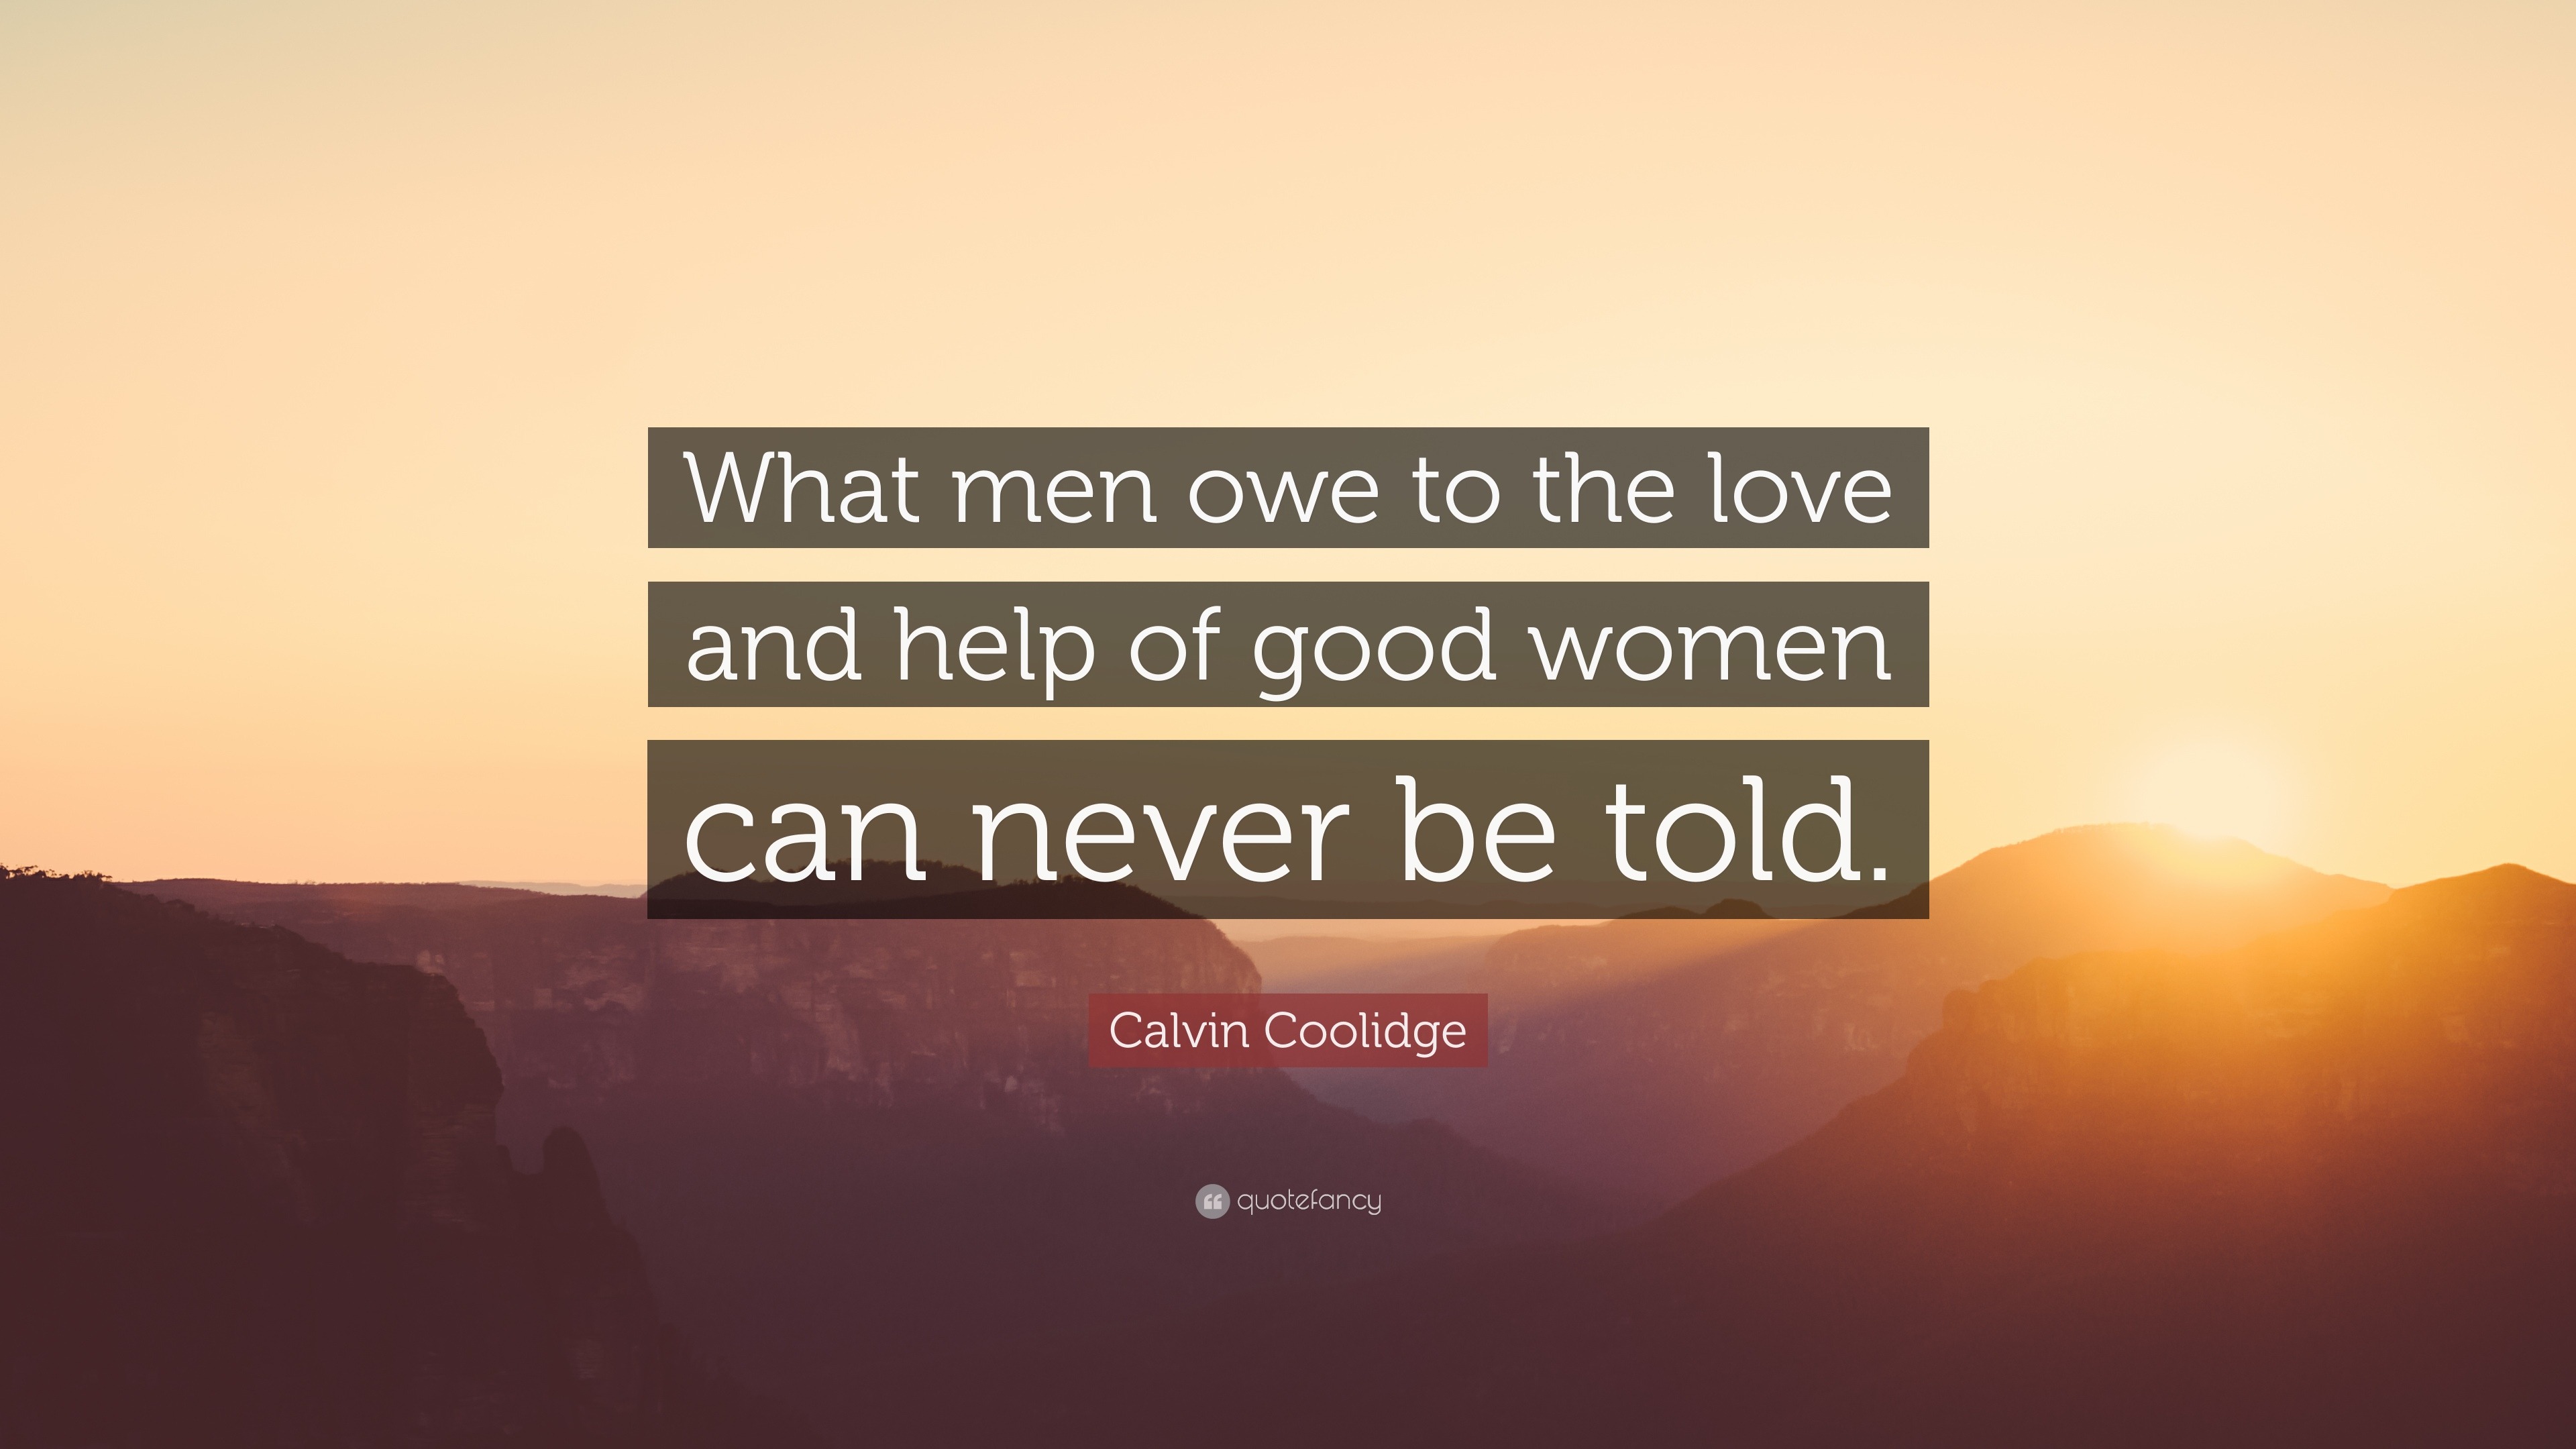 Calvin Coolidge Quote “What men owe to the love and help of good women